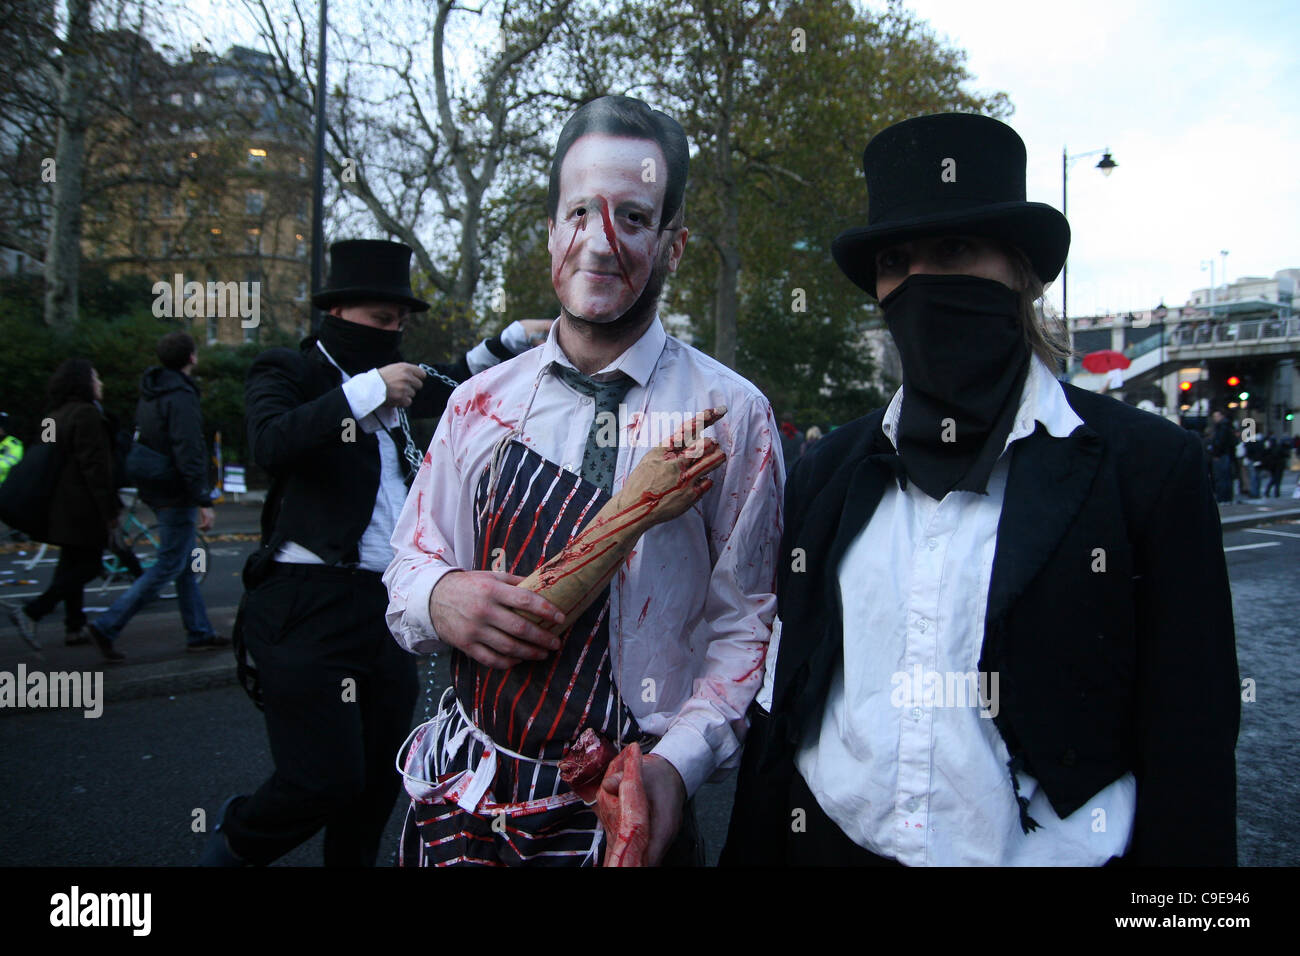 Anarchists dressed in David Cameron mask during a public sector workers strike in London, UK, on Wednesday 30th November, 2011. An estimated two million public sector workers took part in the UK-wide strike over Government proposals to change their pensions. Stock Photo